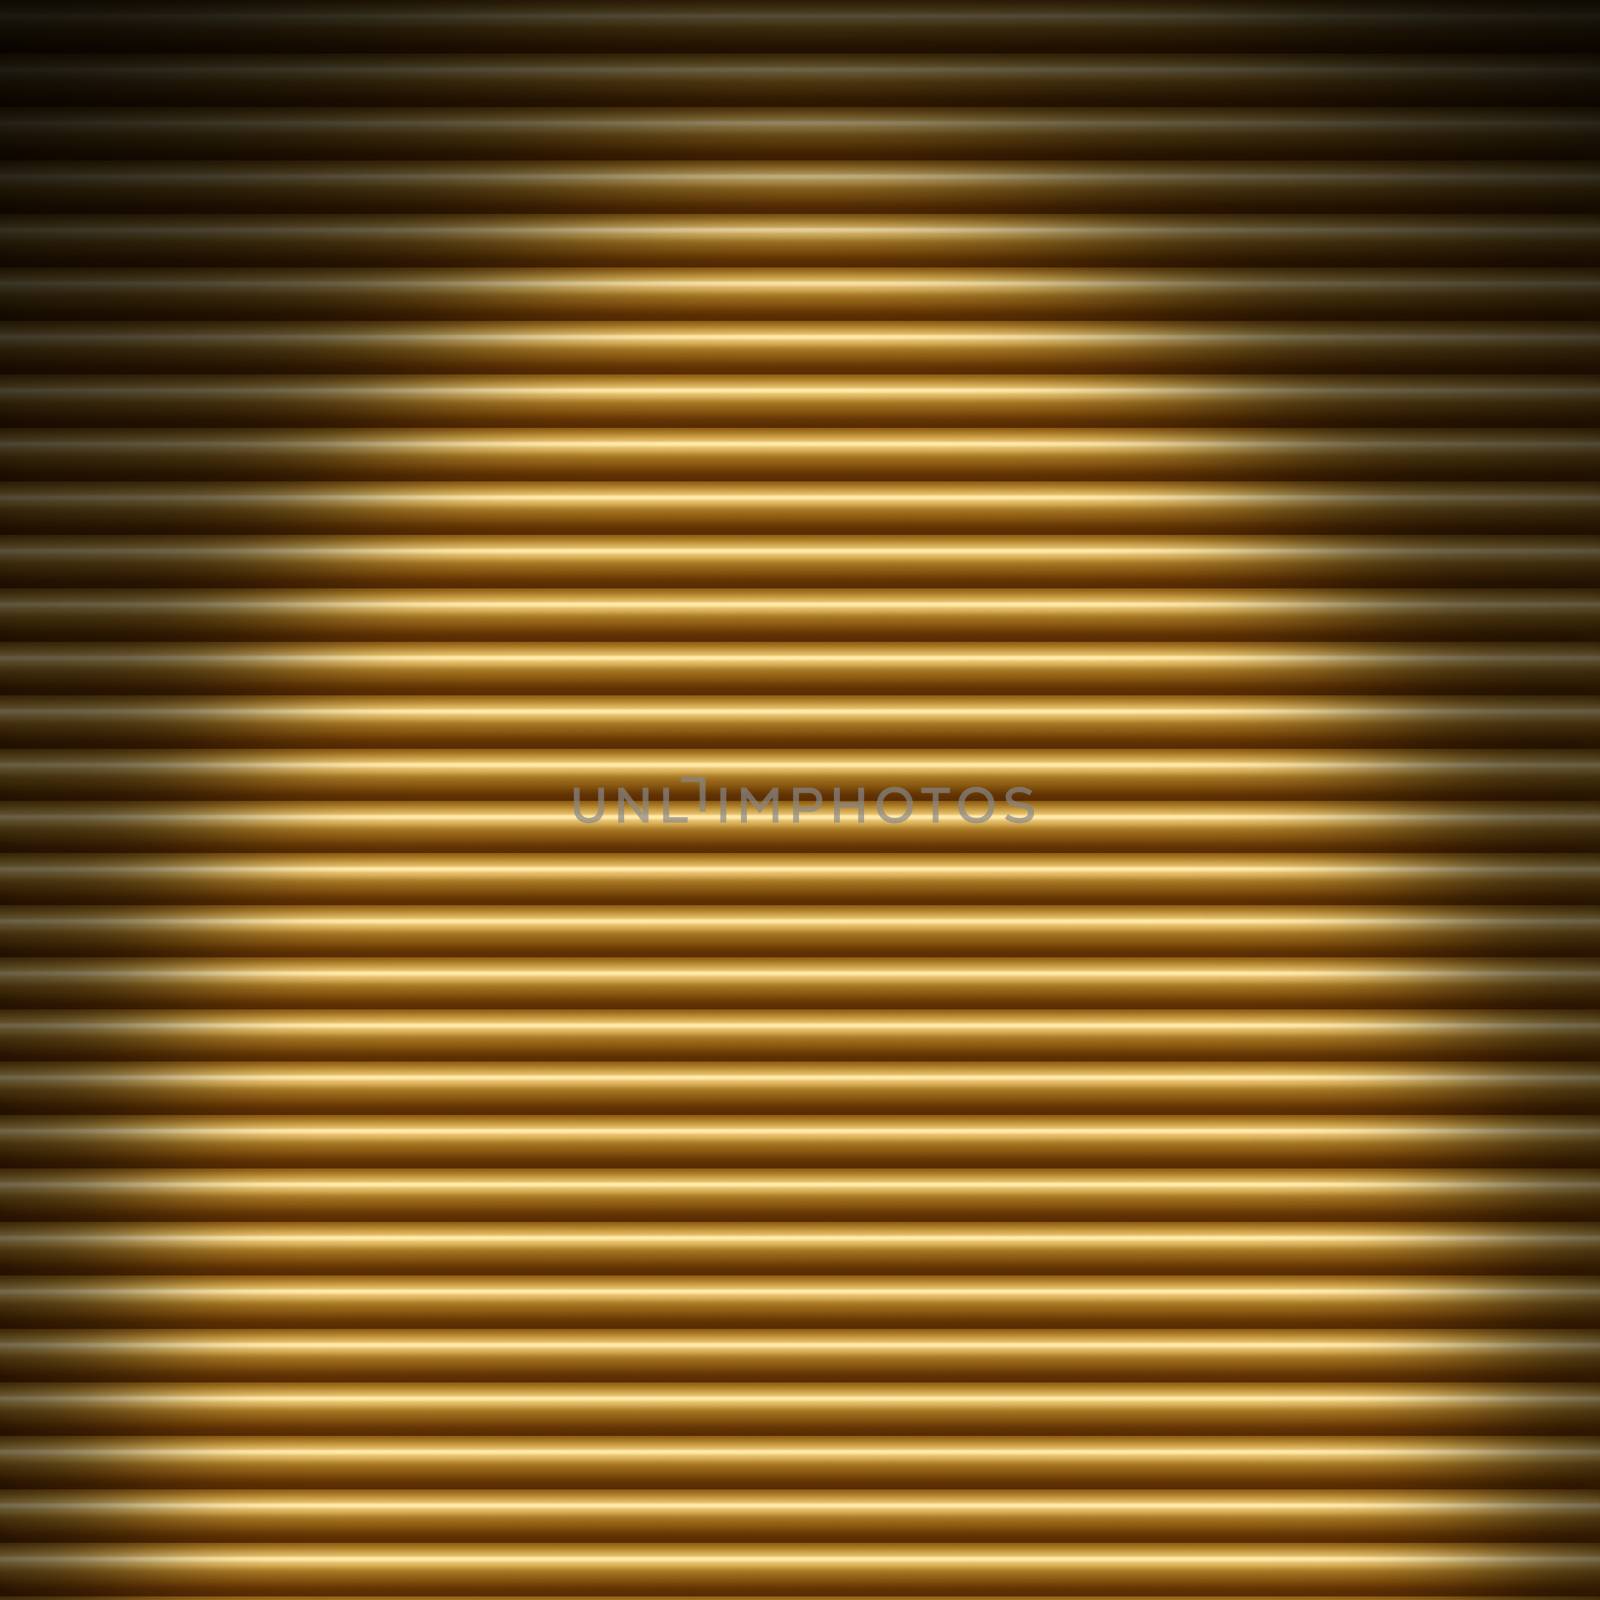 Horizontal gold tube background texture lit from overhead